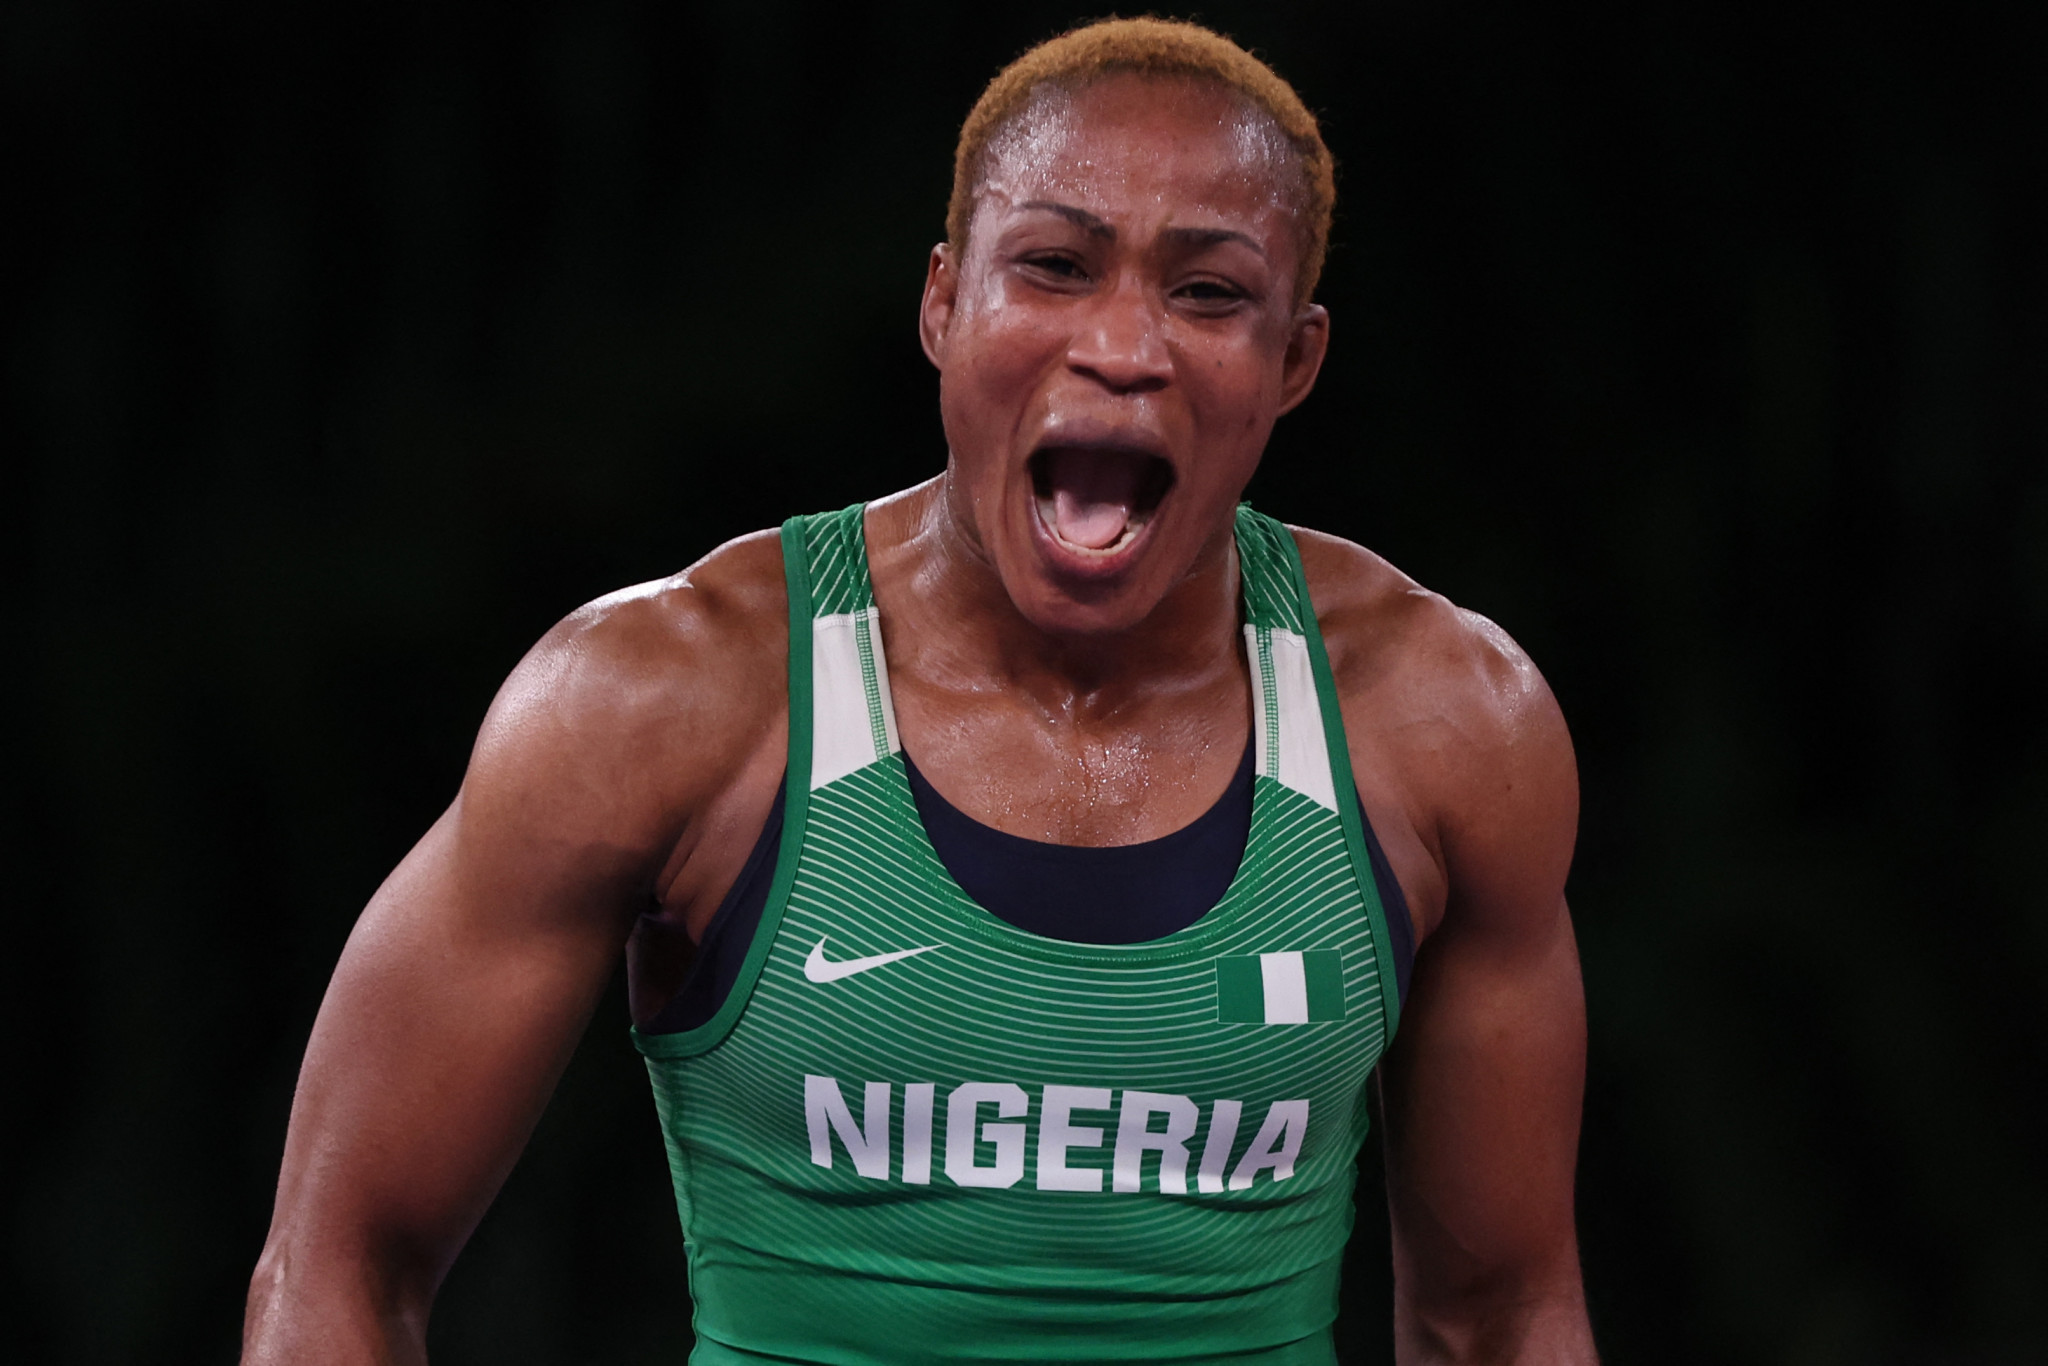 Wrestler Blessing Oborududu won Olympic silver at Tokyo 2020 ©Getty Images